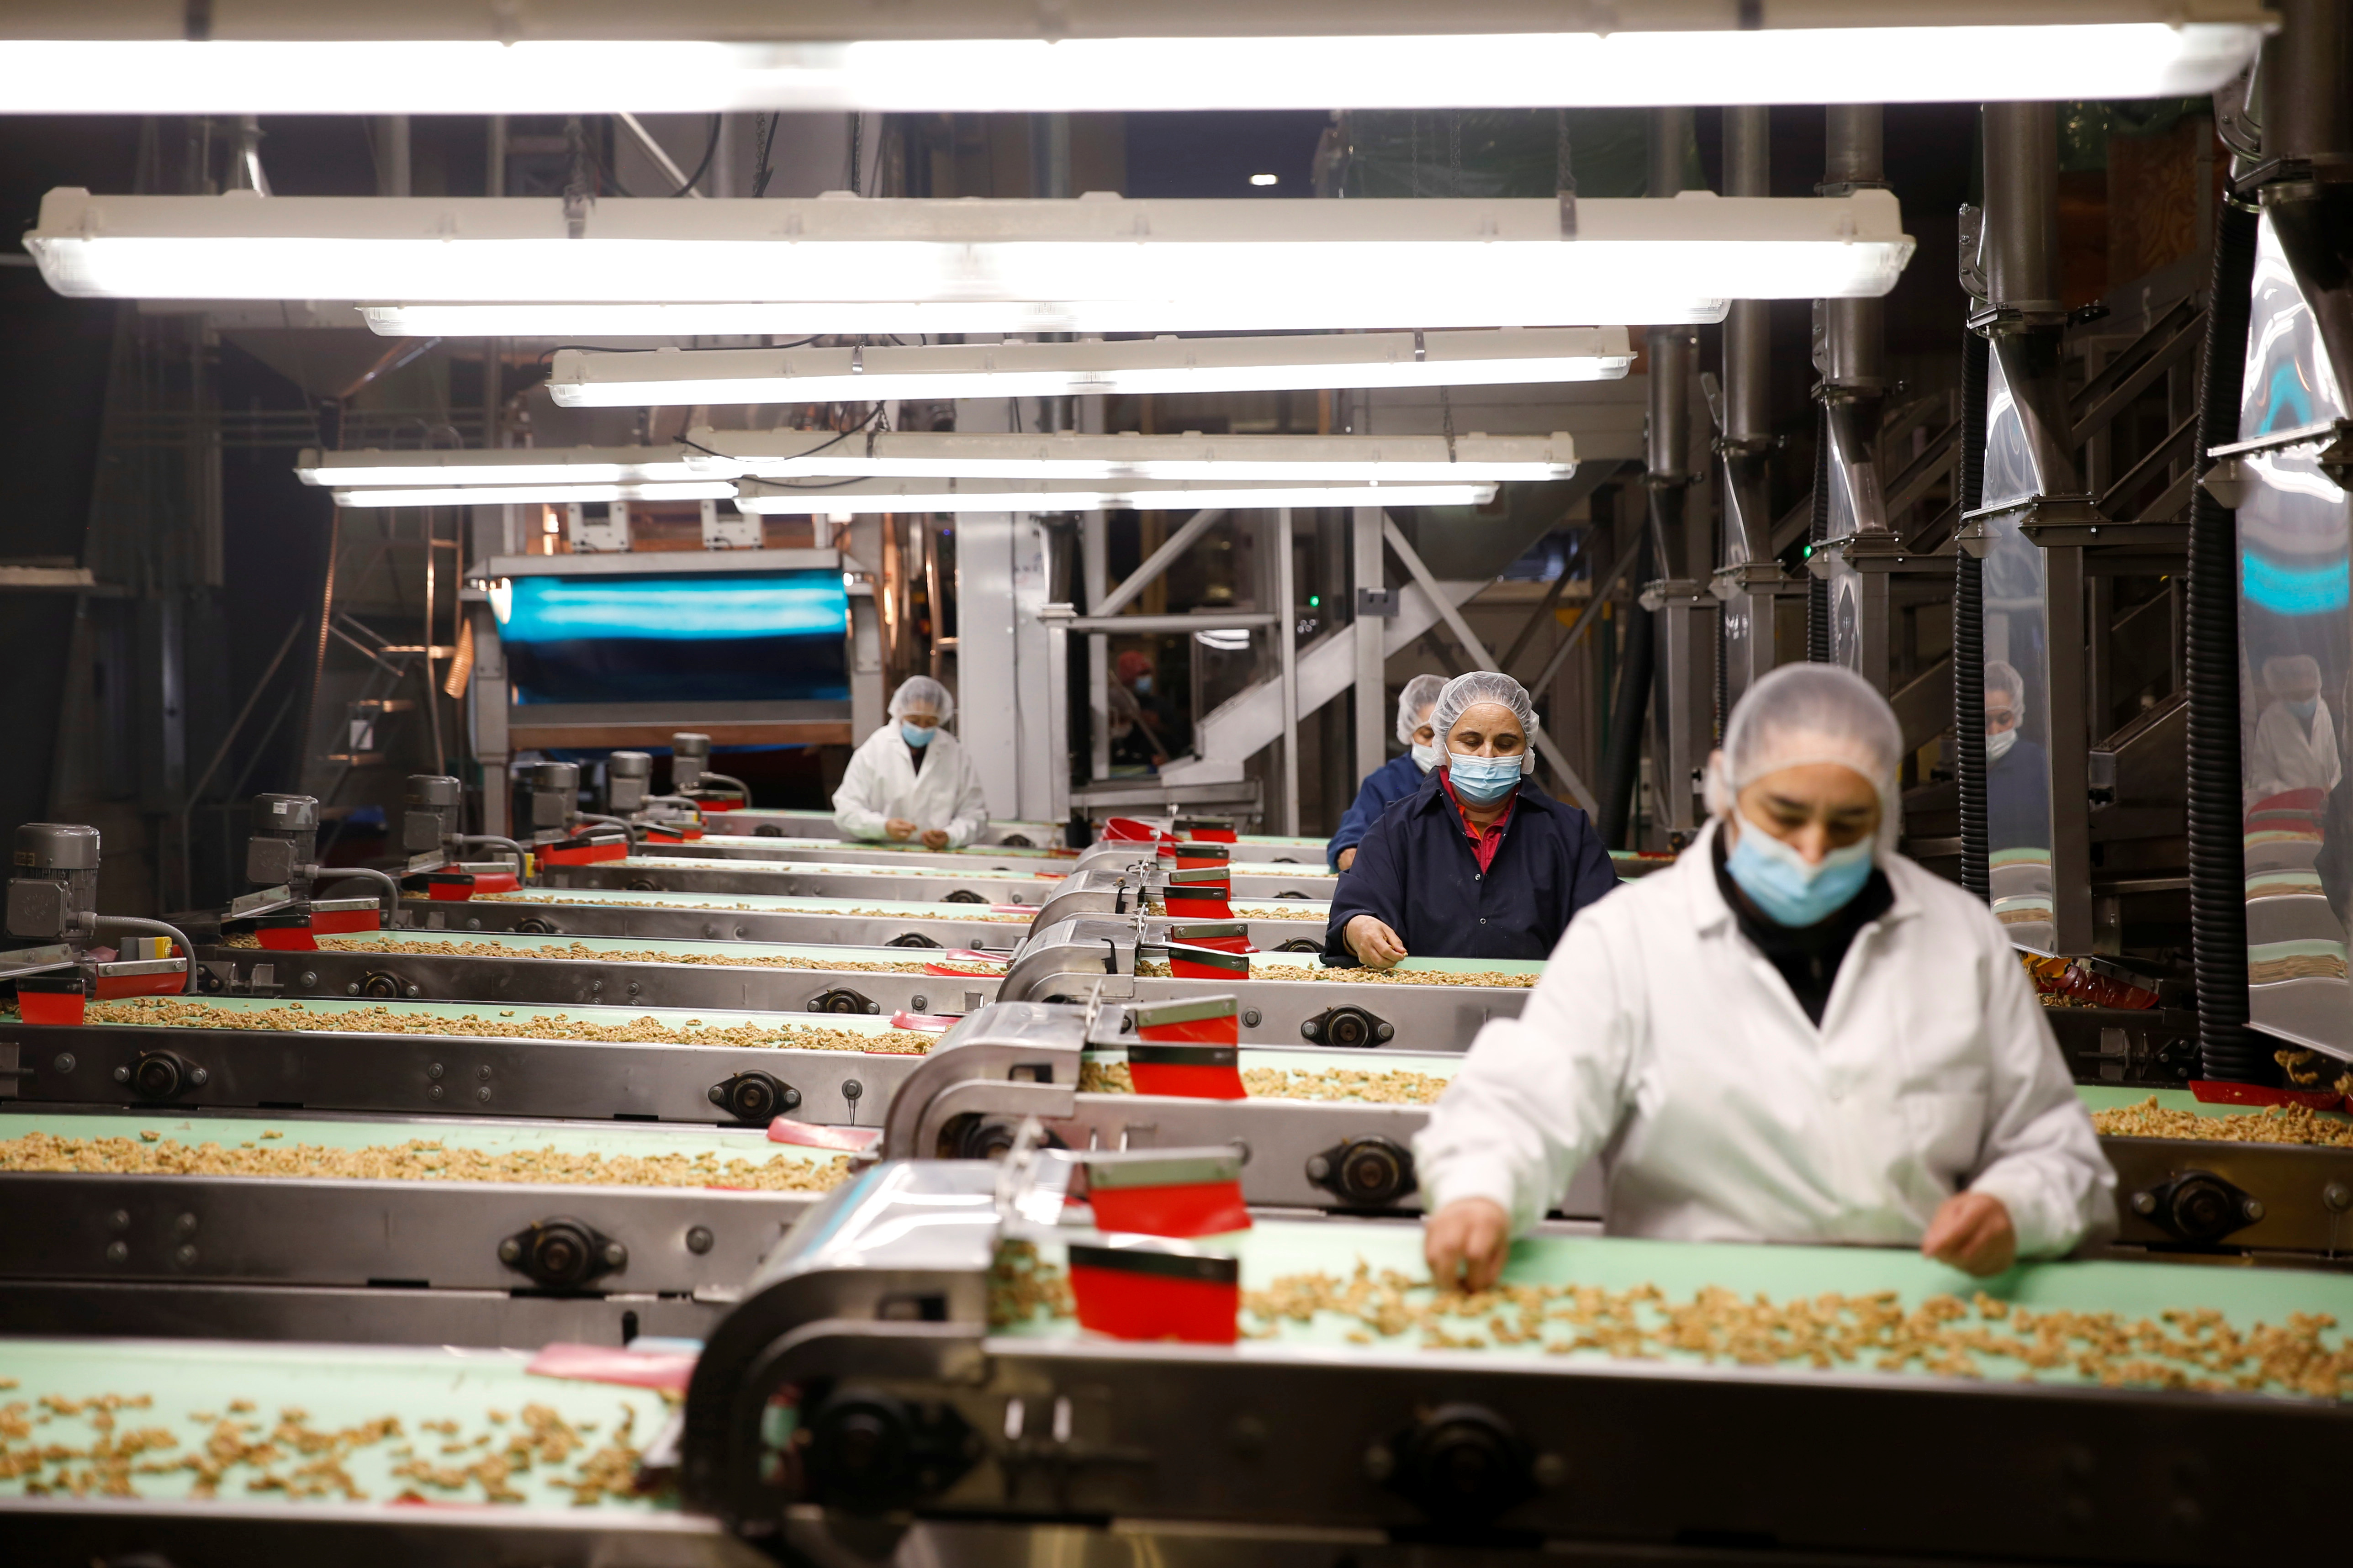 Workers hand sort shelled walnuts along conveyor belts at GoldRiver Orchards, a family-owned walnut producer in Escalon, California, U.S. November 16, 2021.   REUTERS/Brittany Hosea-Small